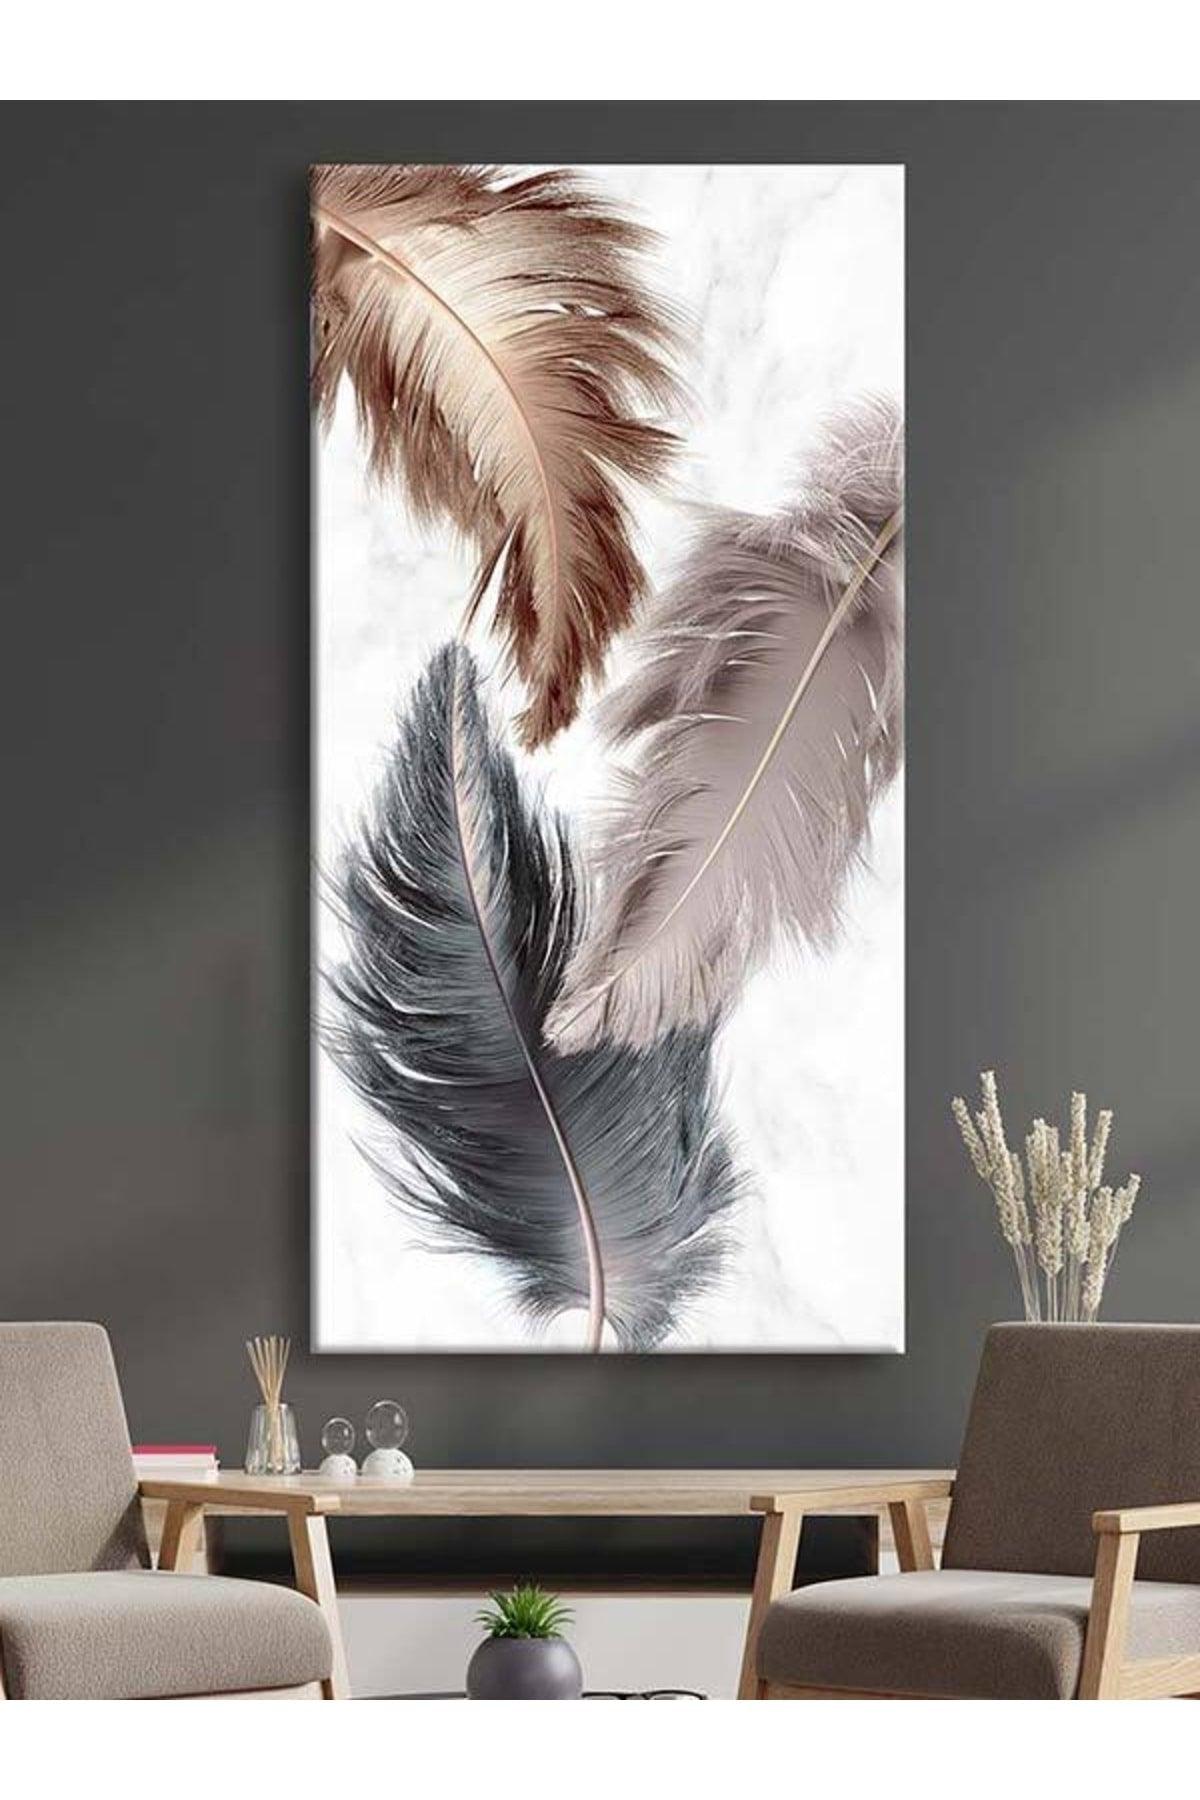 Decorative Feathers Canvas Painting - Voov2140 - Swordslife